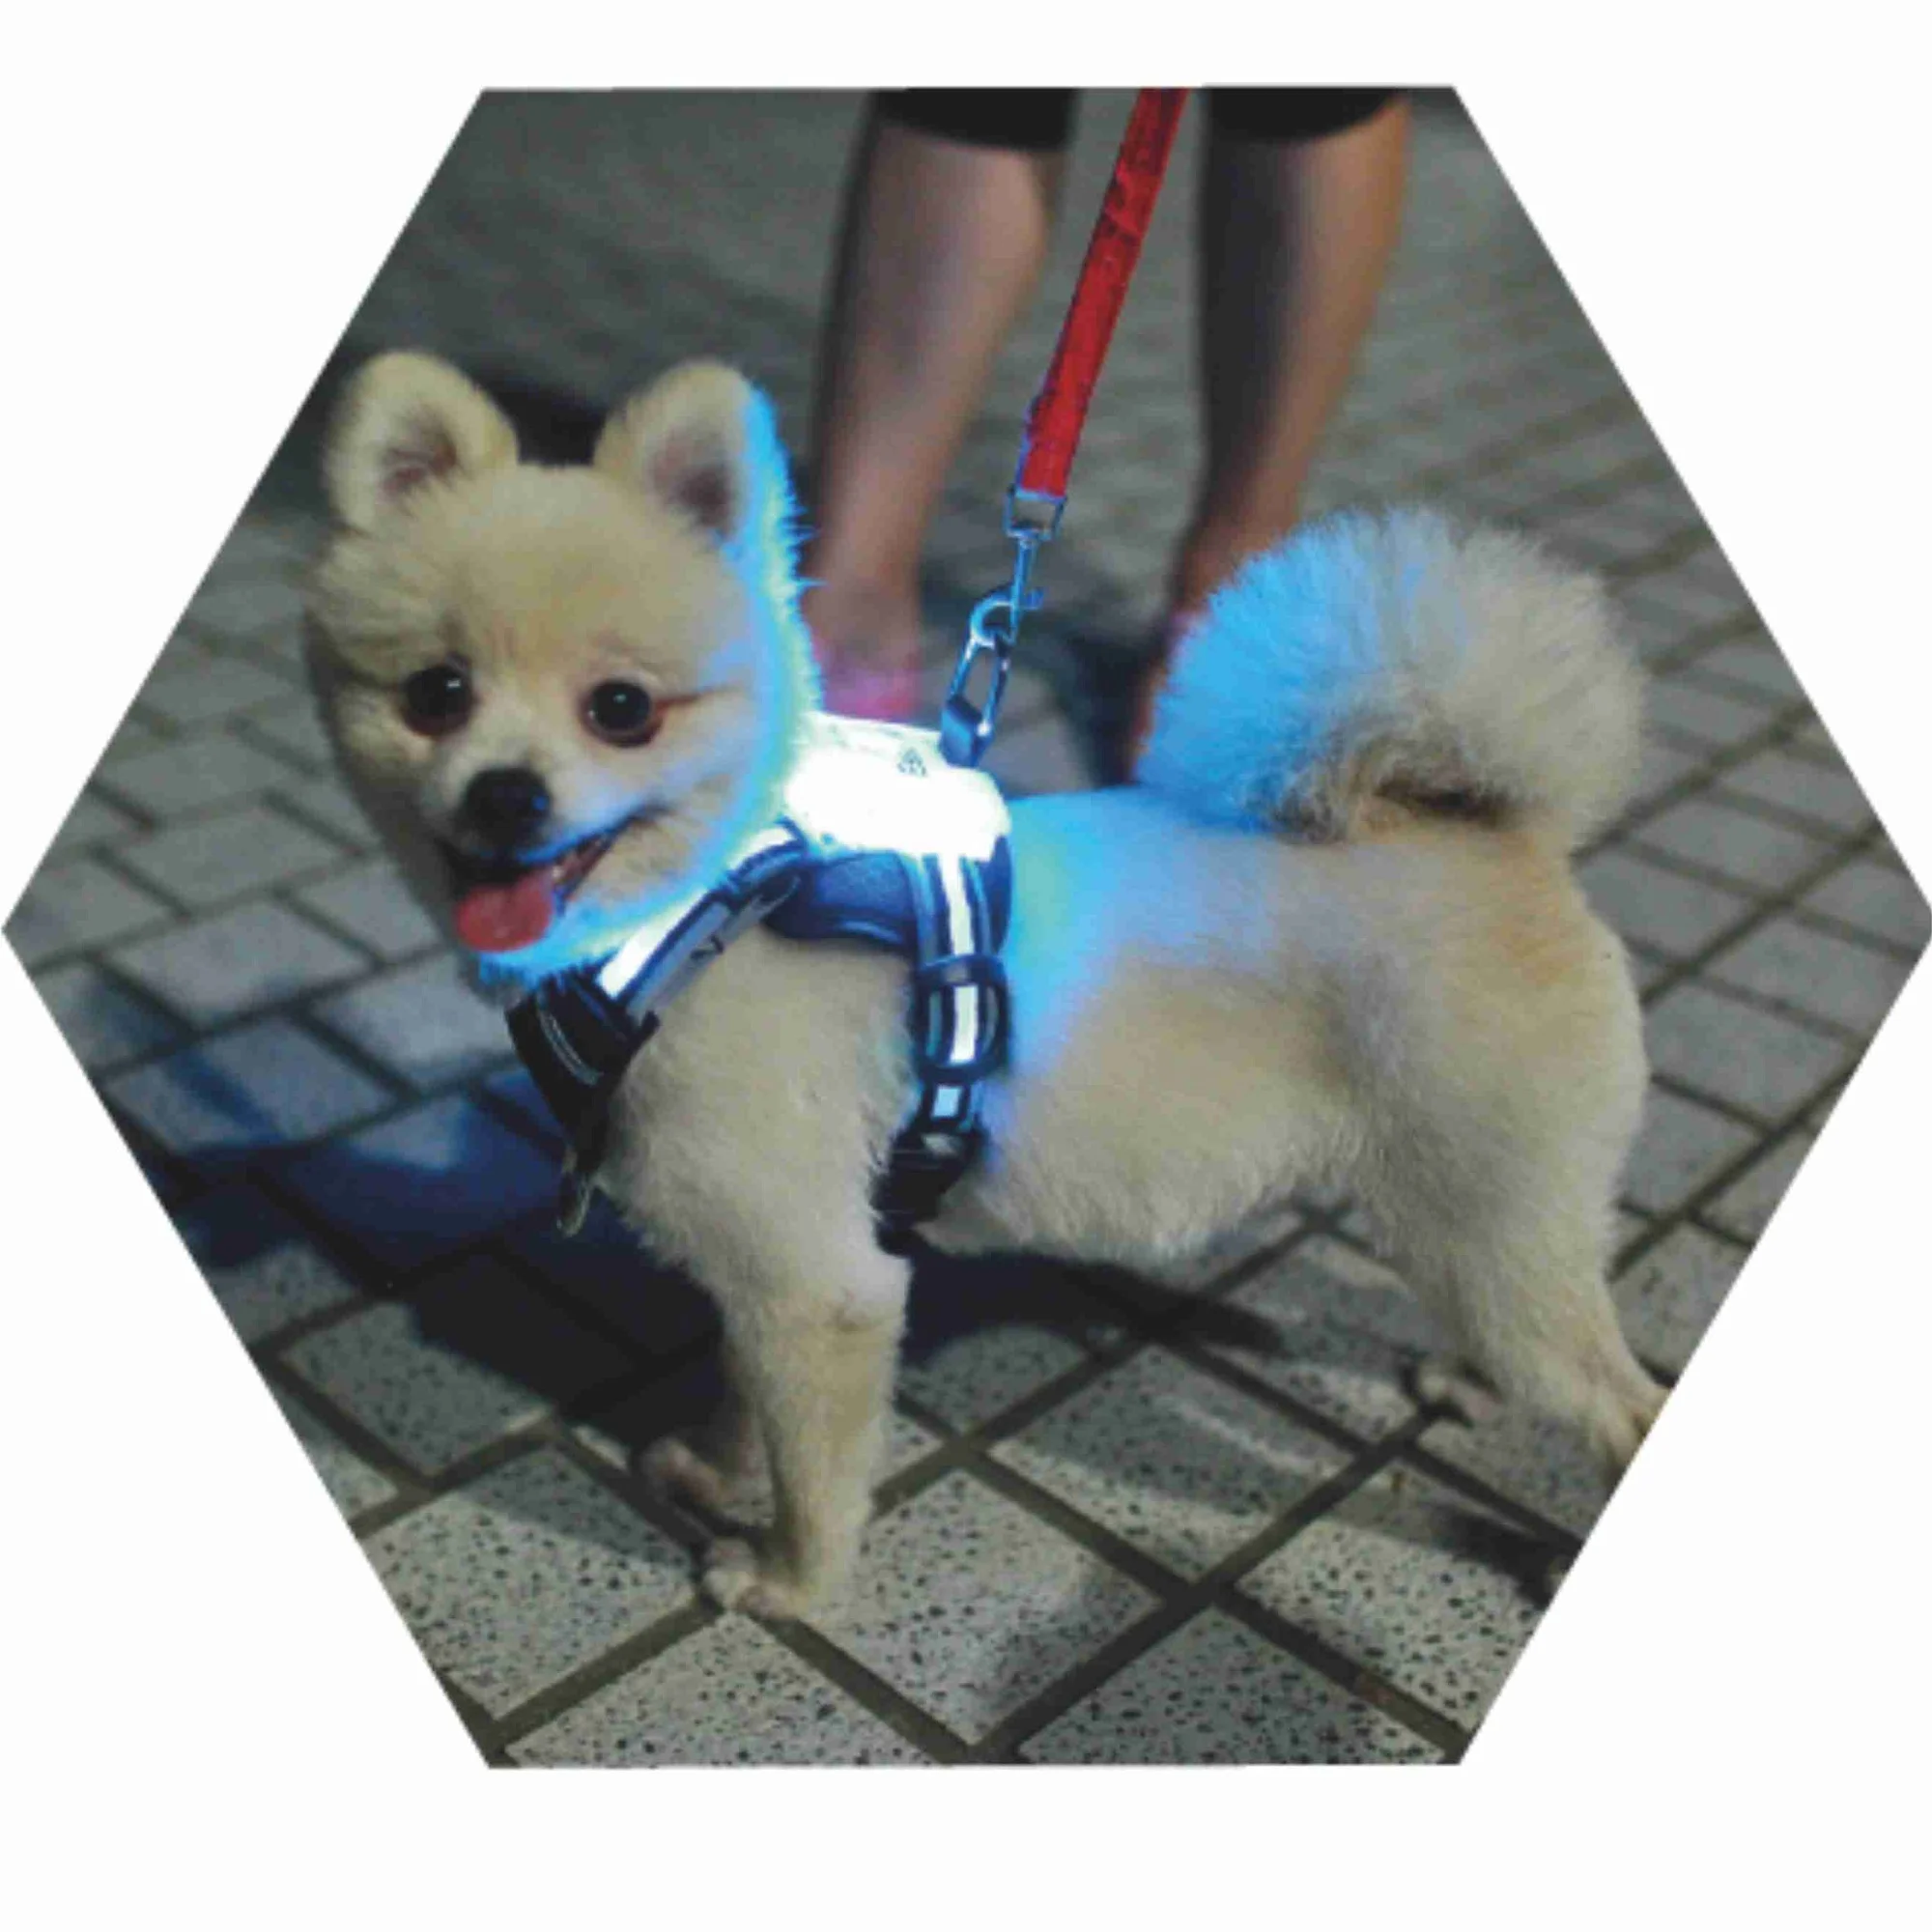 

CC Simon Led Dog Harness 7 color in 1